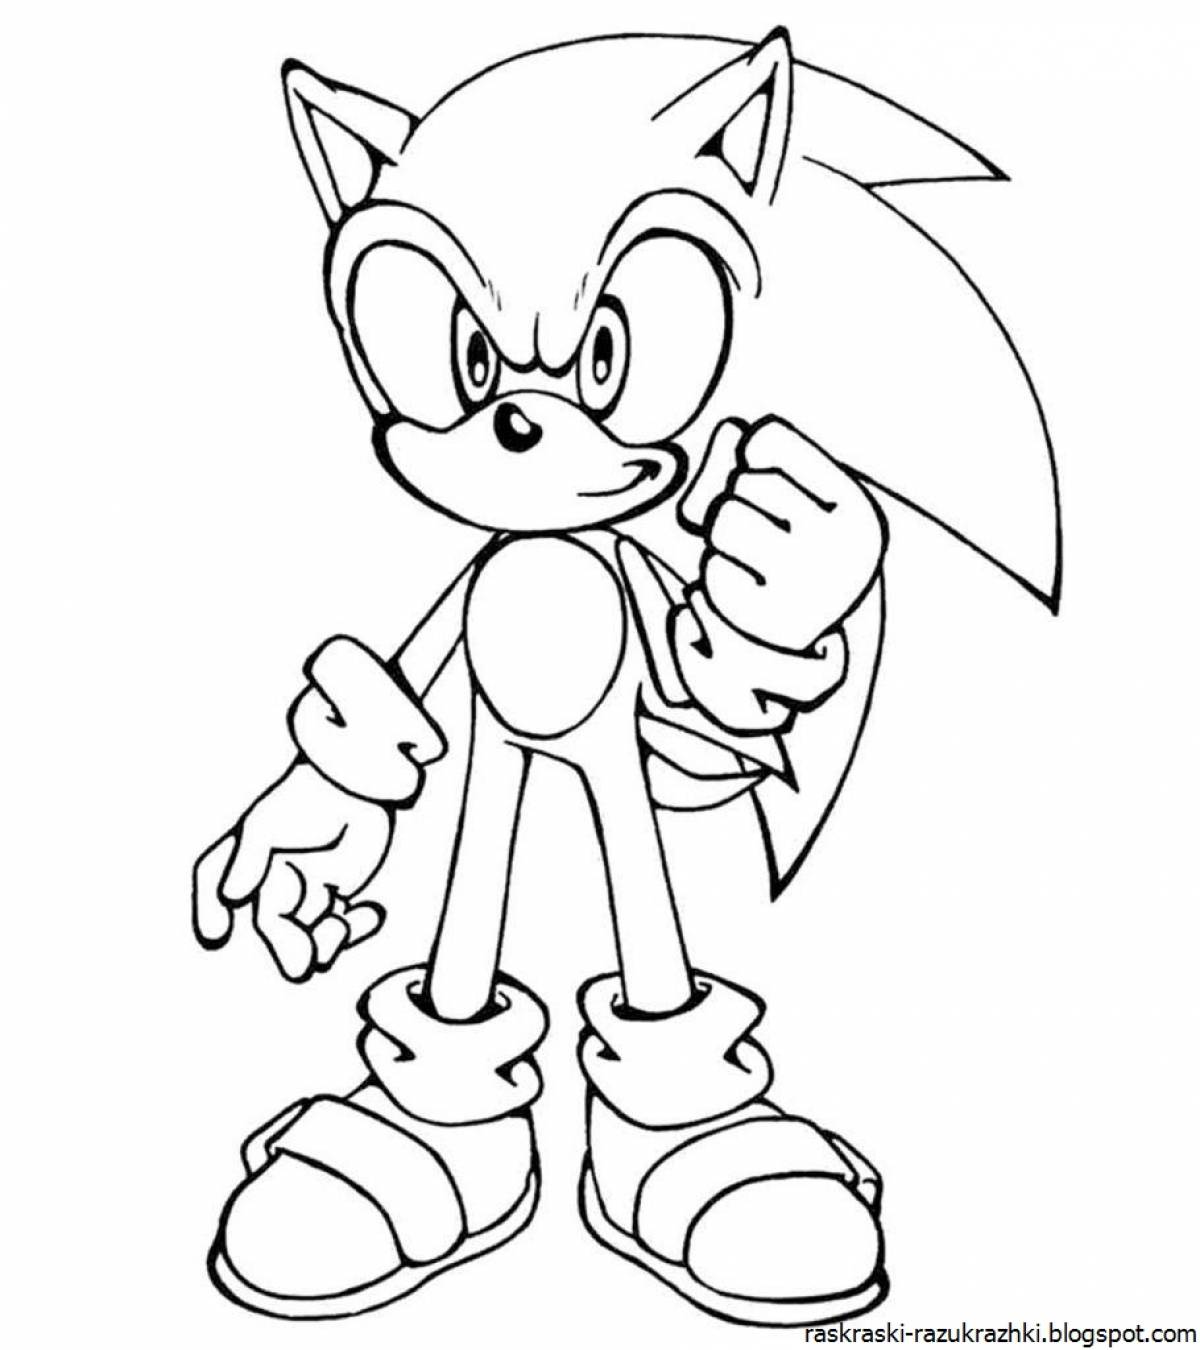 Sonic the hedgehog dynamic coloring